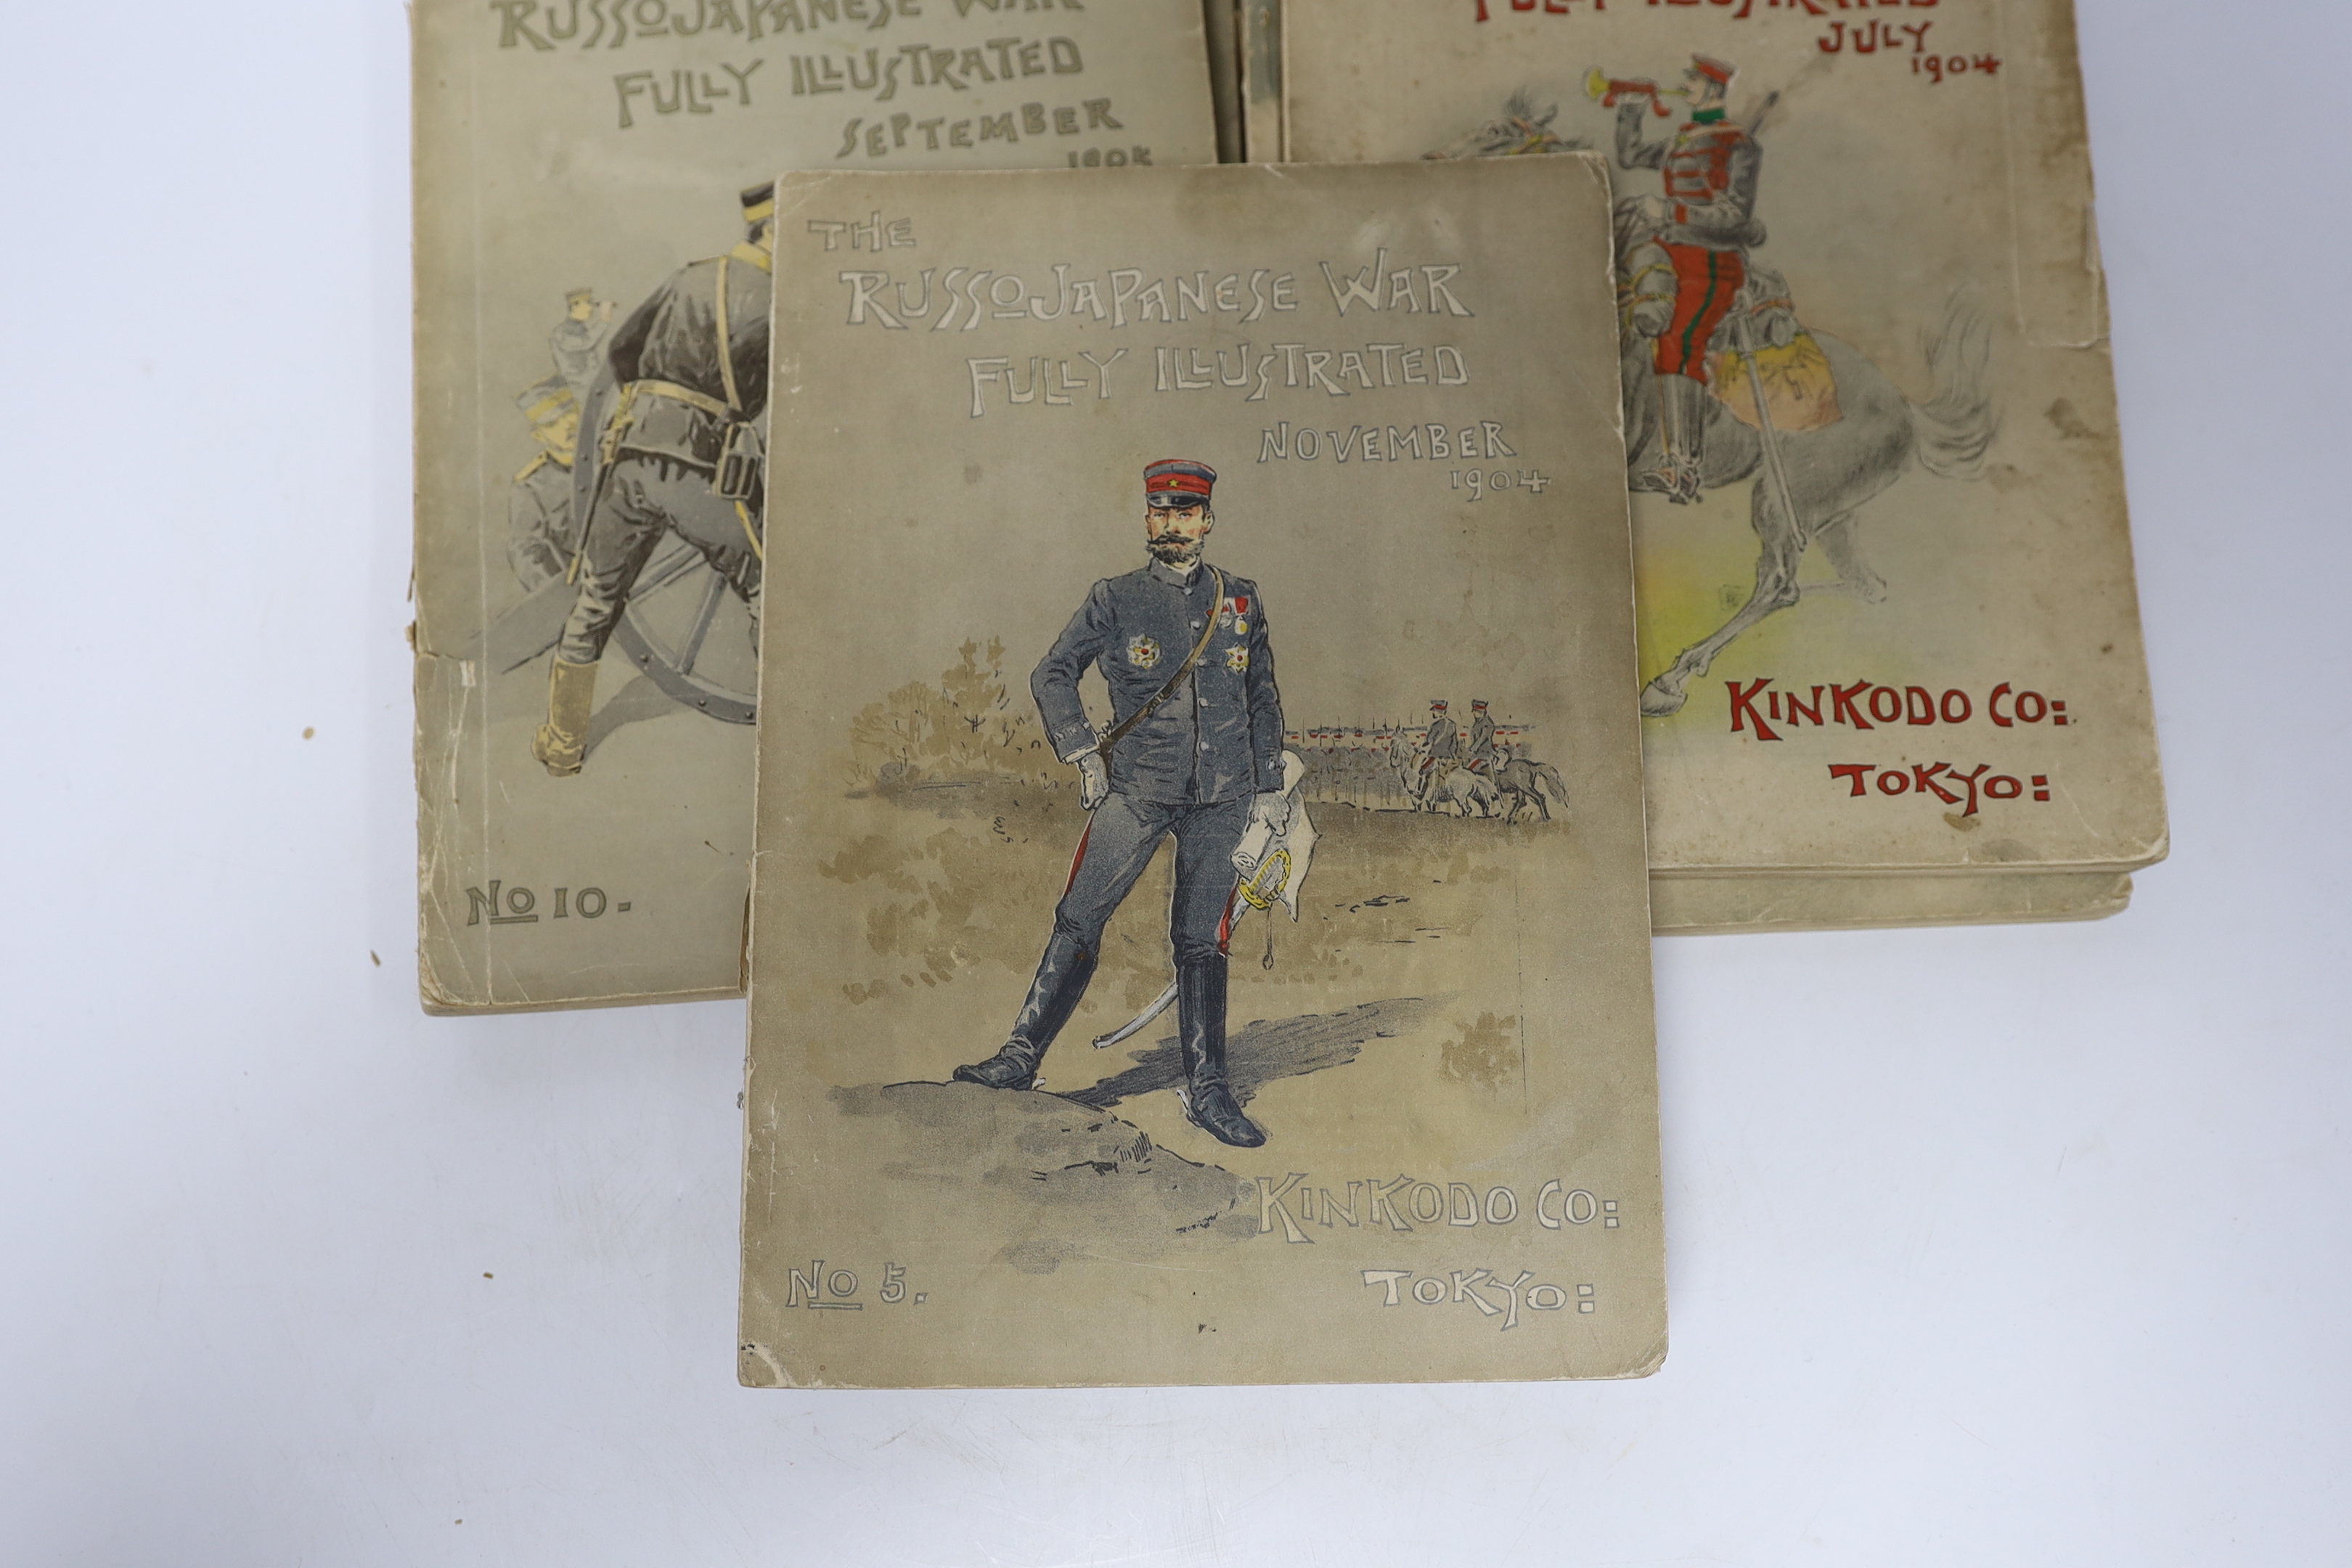 Five volumes of the Russo-Japanese war, illustrated, July 1904, November 1904, March 1905, July 1905 and September 1905